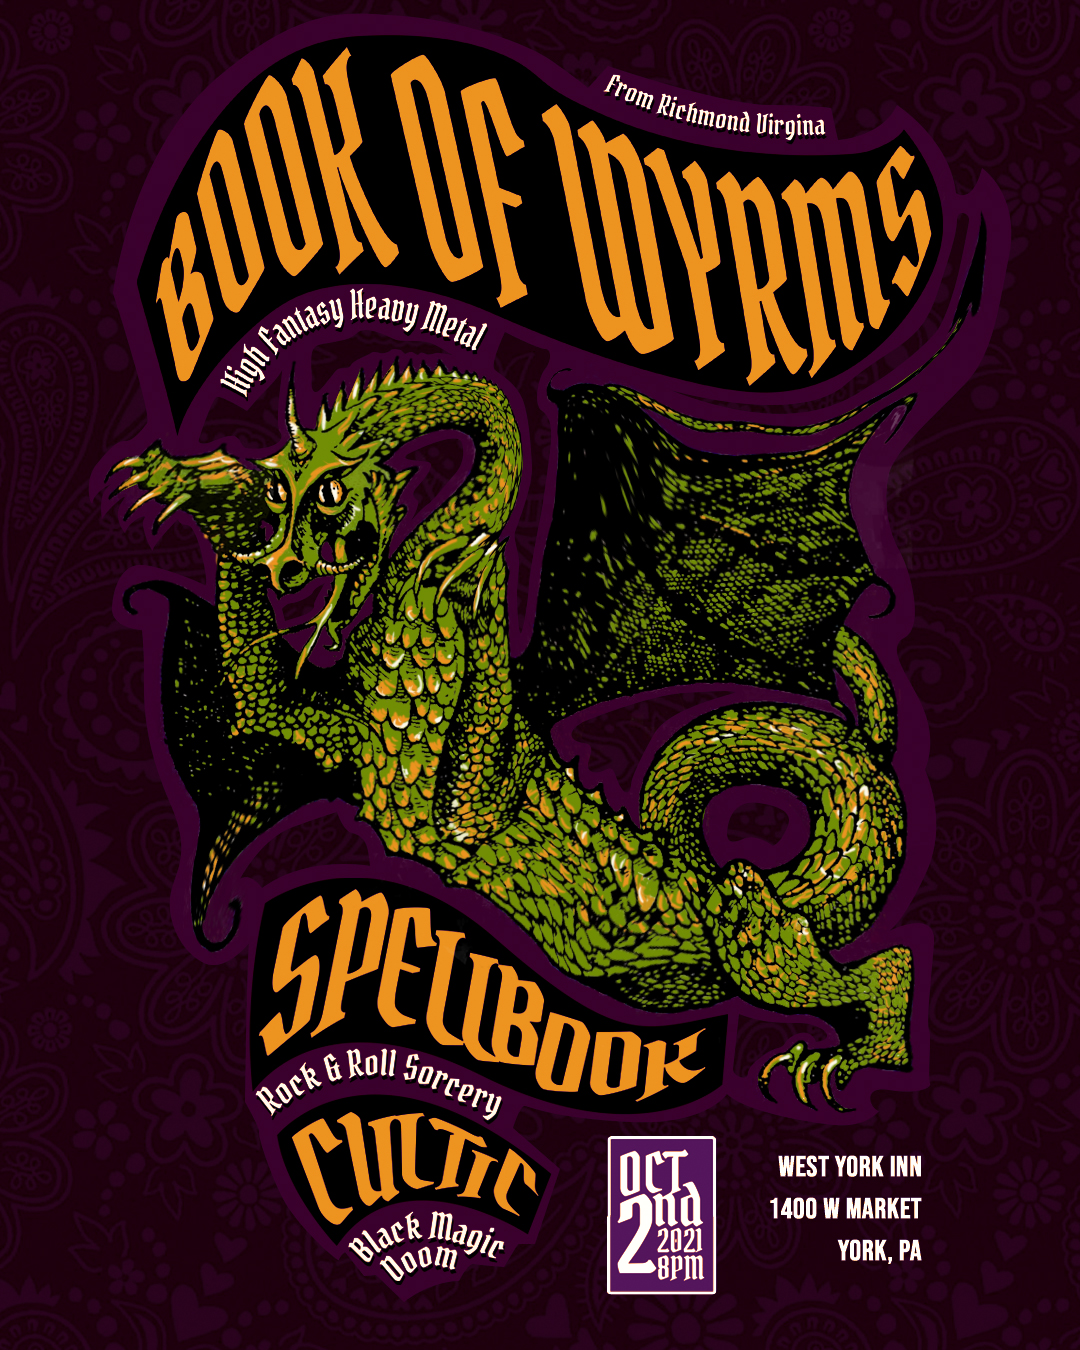 Book of Wyrms Show Flyer